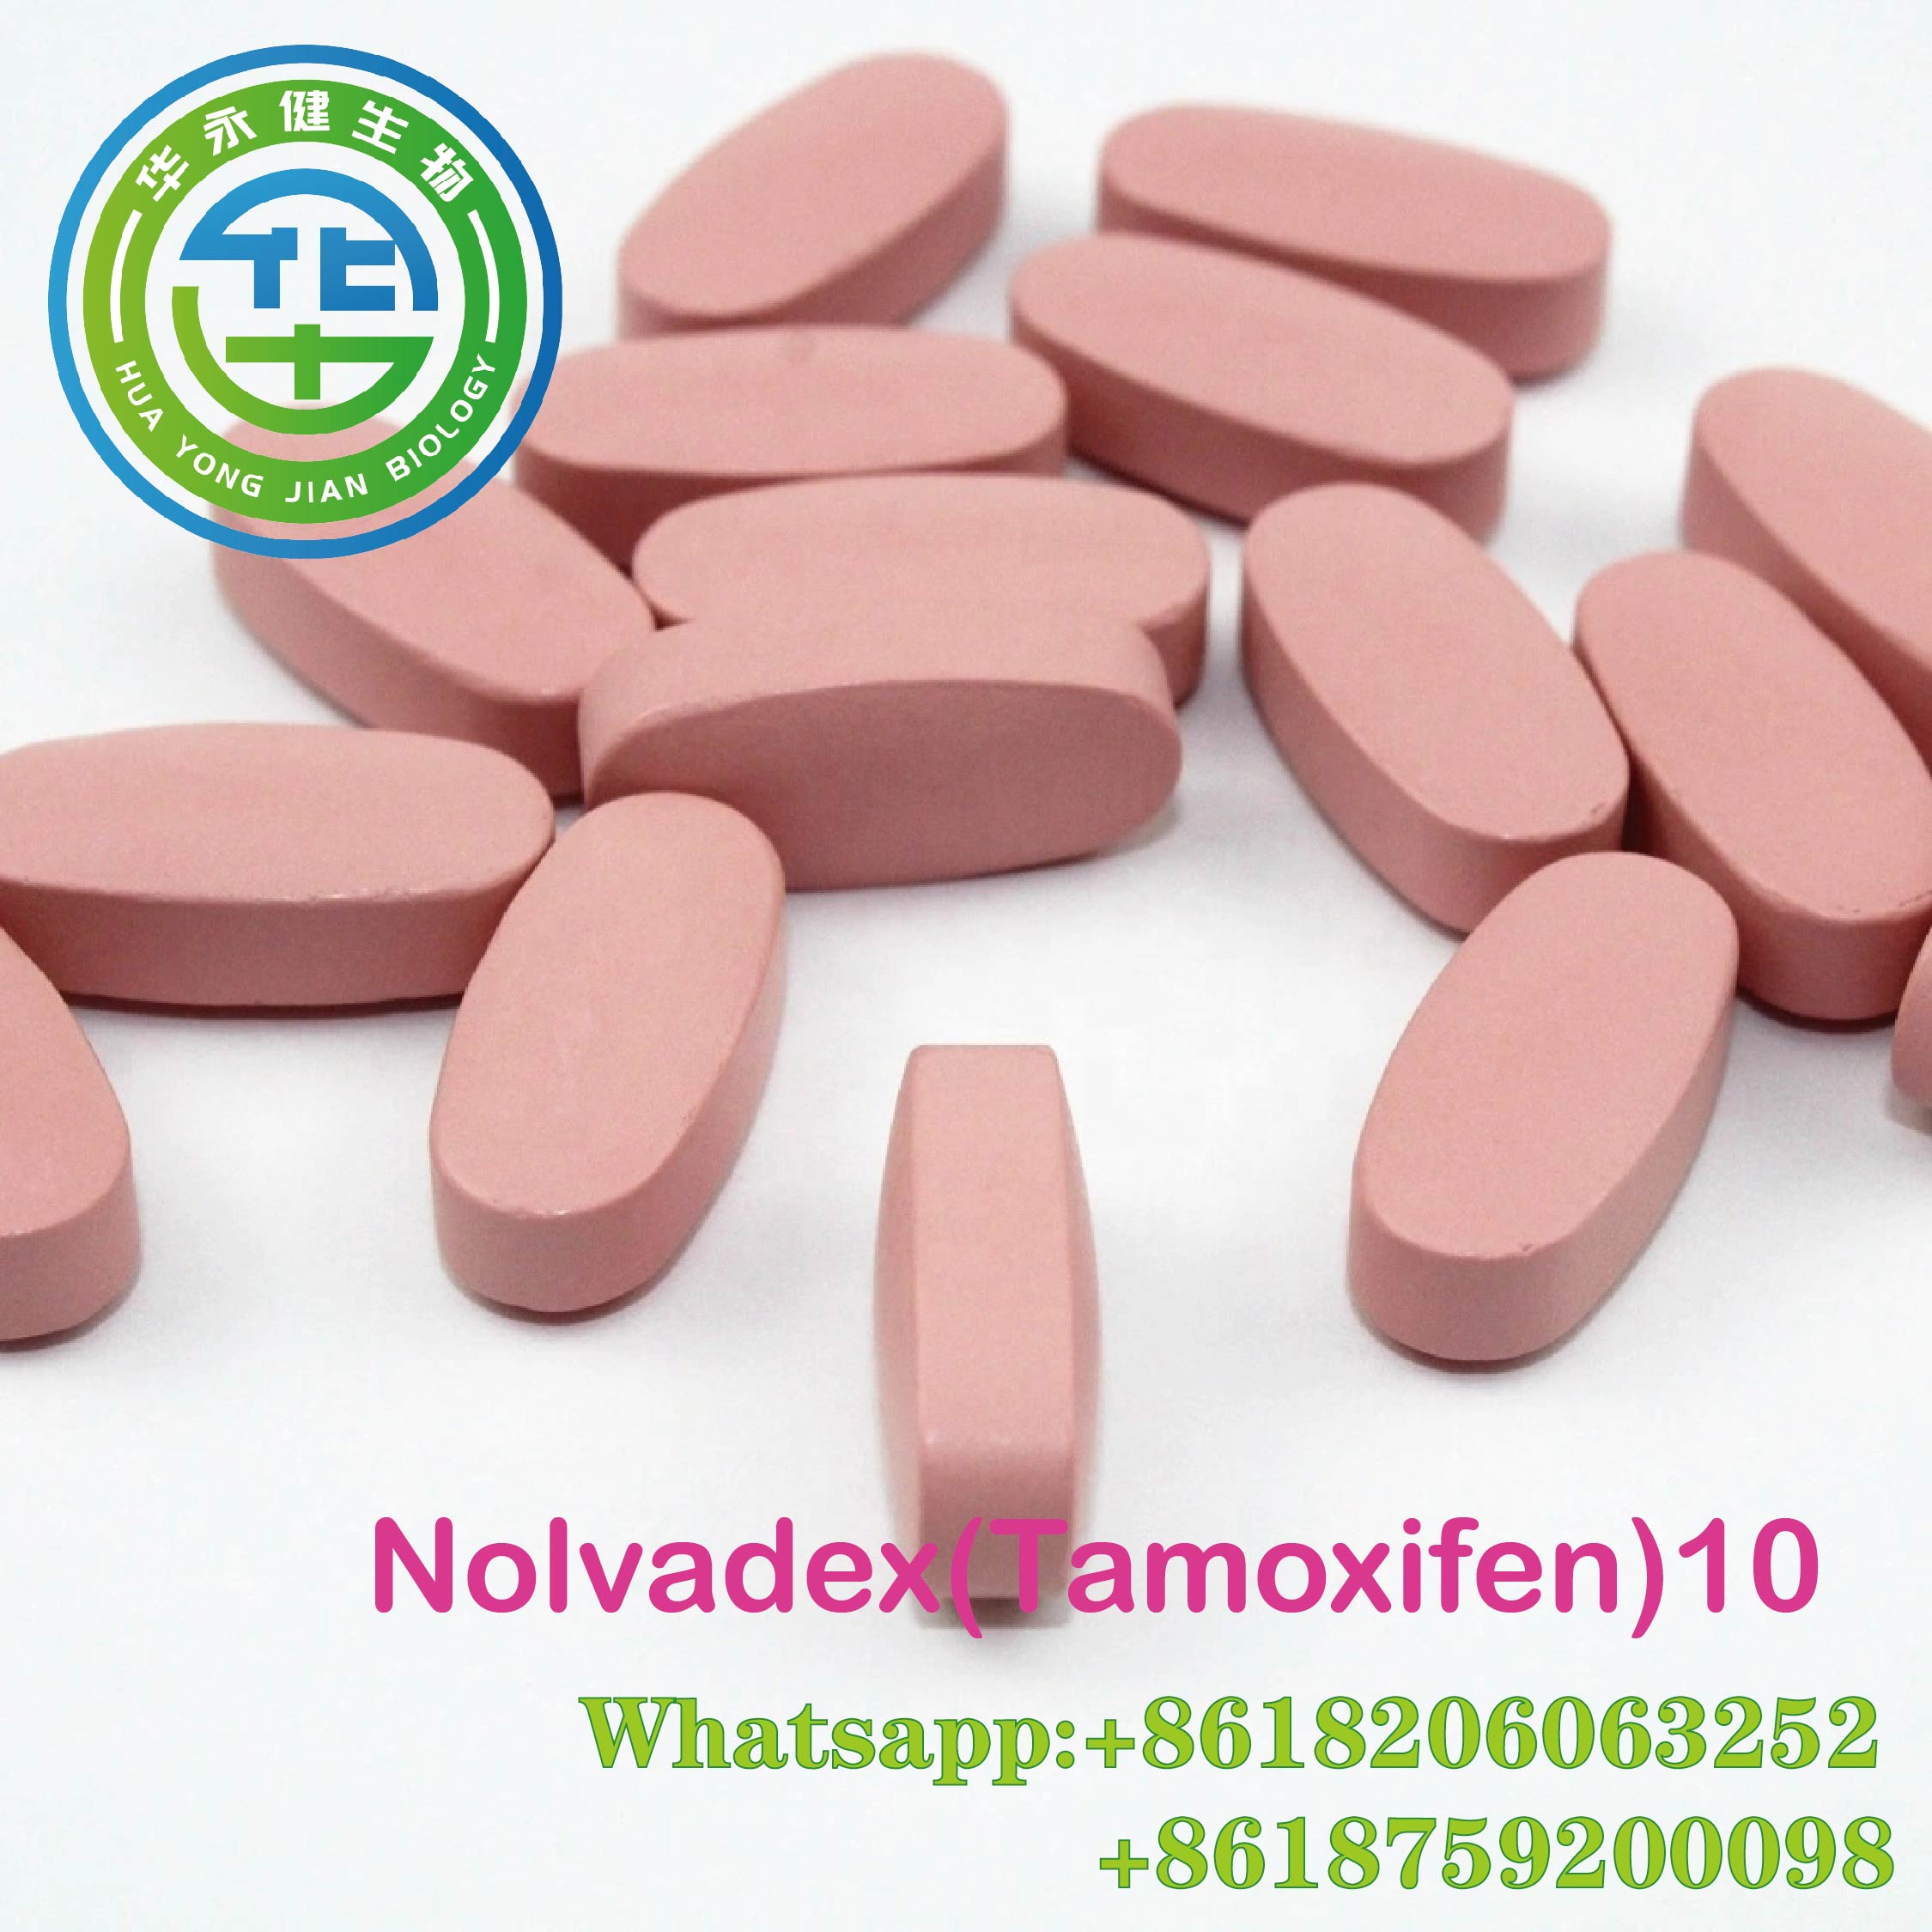 Nolvadex 10mg Tablet Injectable Anabolic Steroids White Tamoxifen Citrate 100pcs/bottle